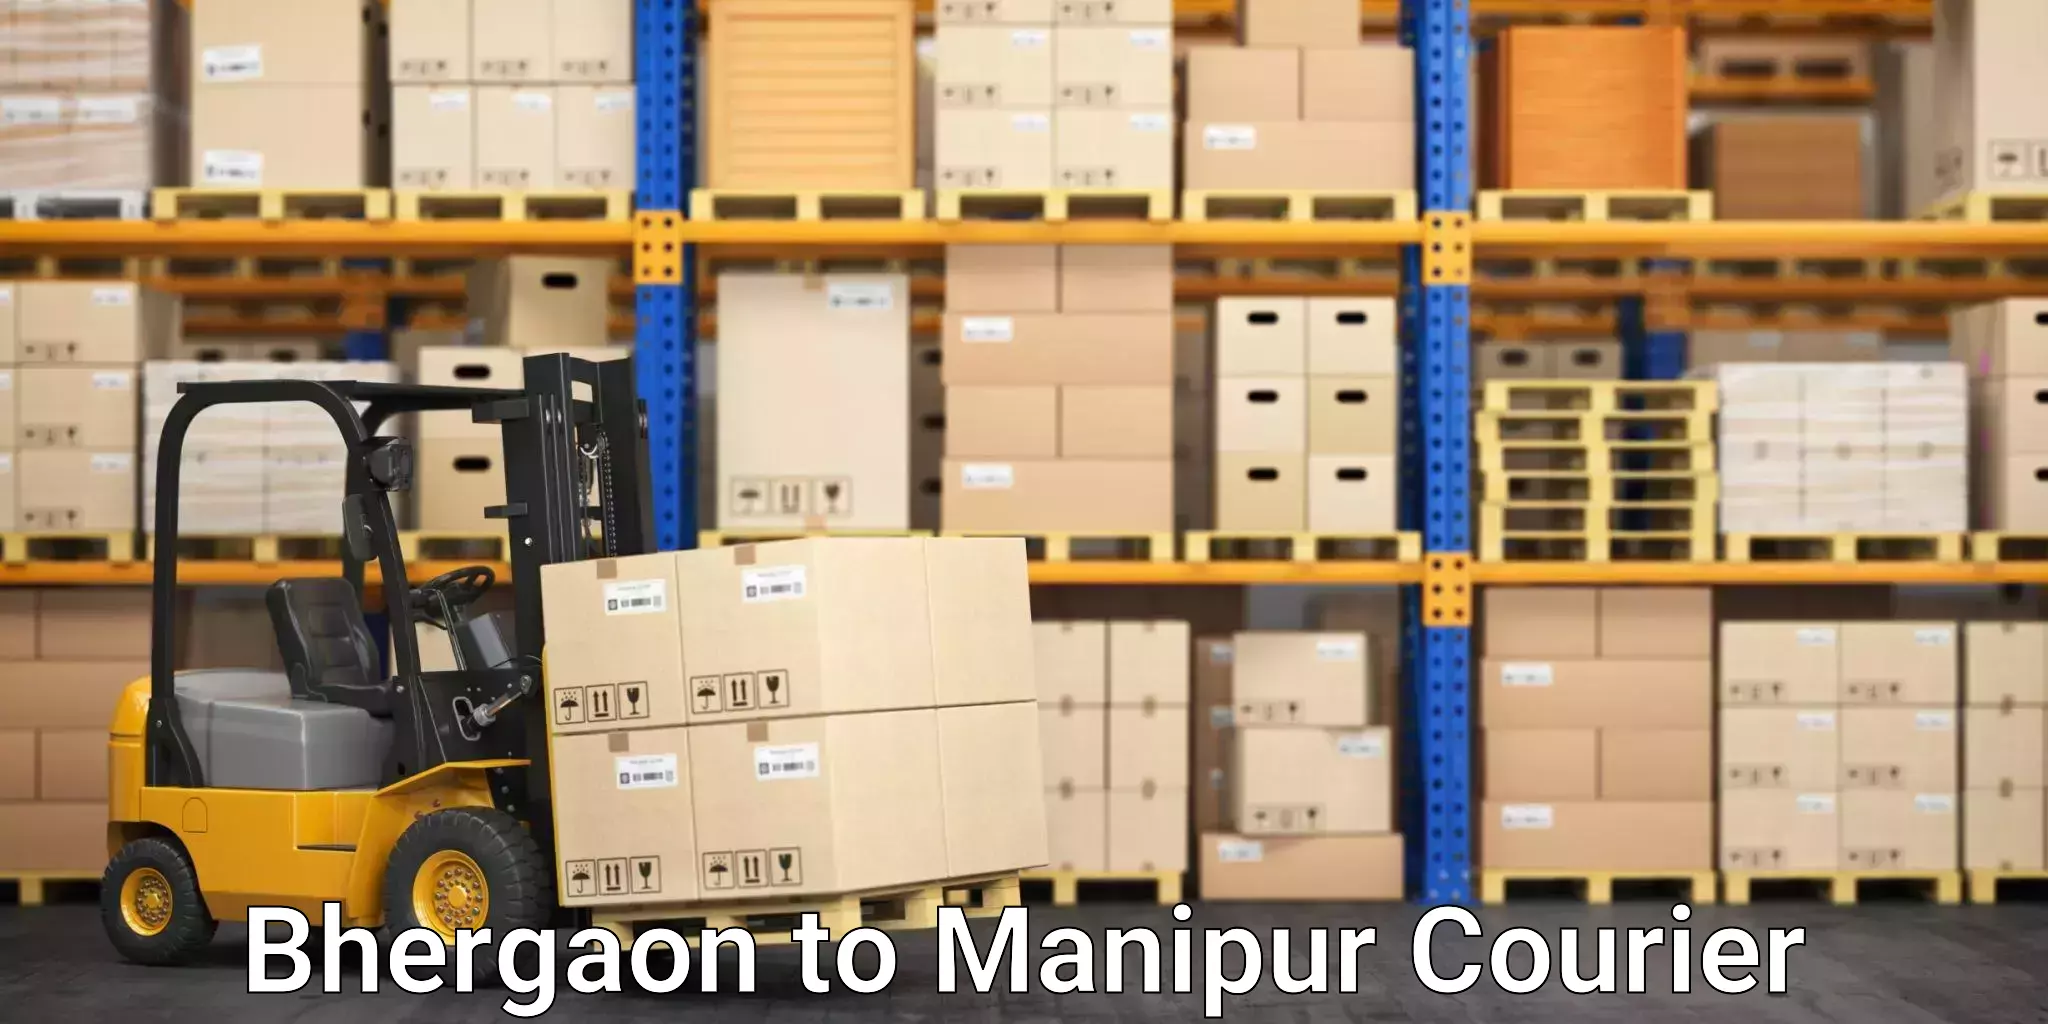 Cargo delivery service Bhergaon to Manipur